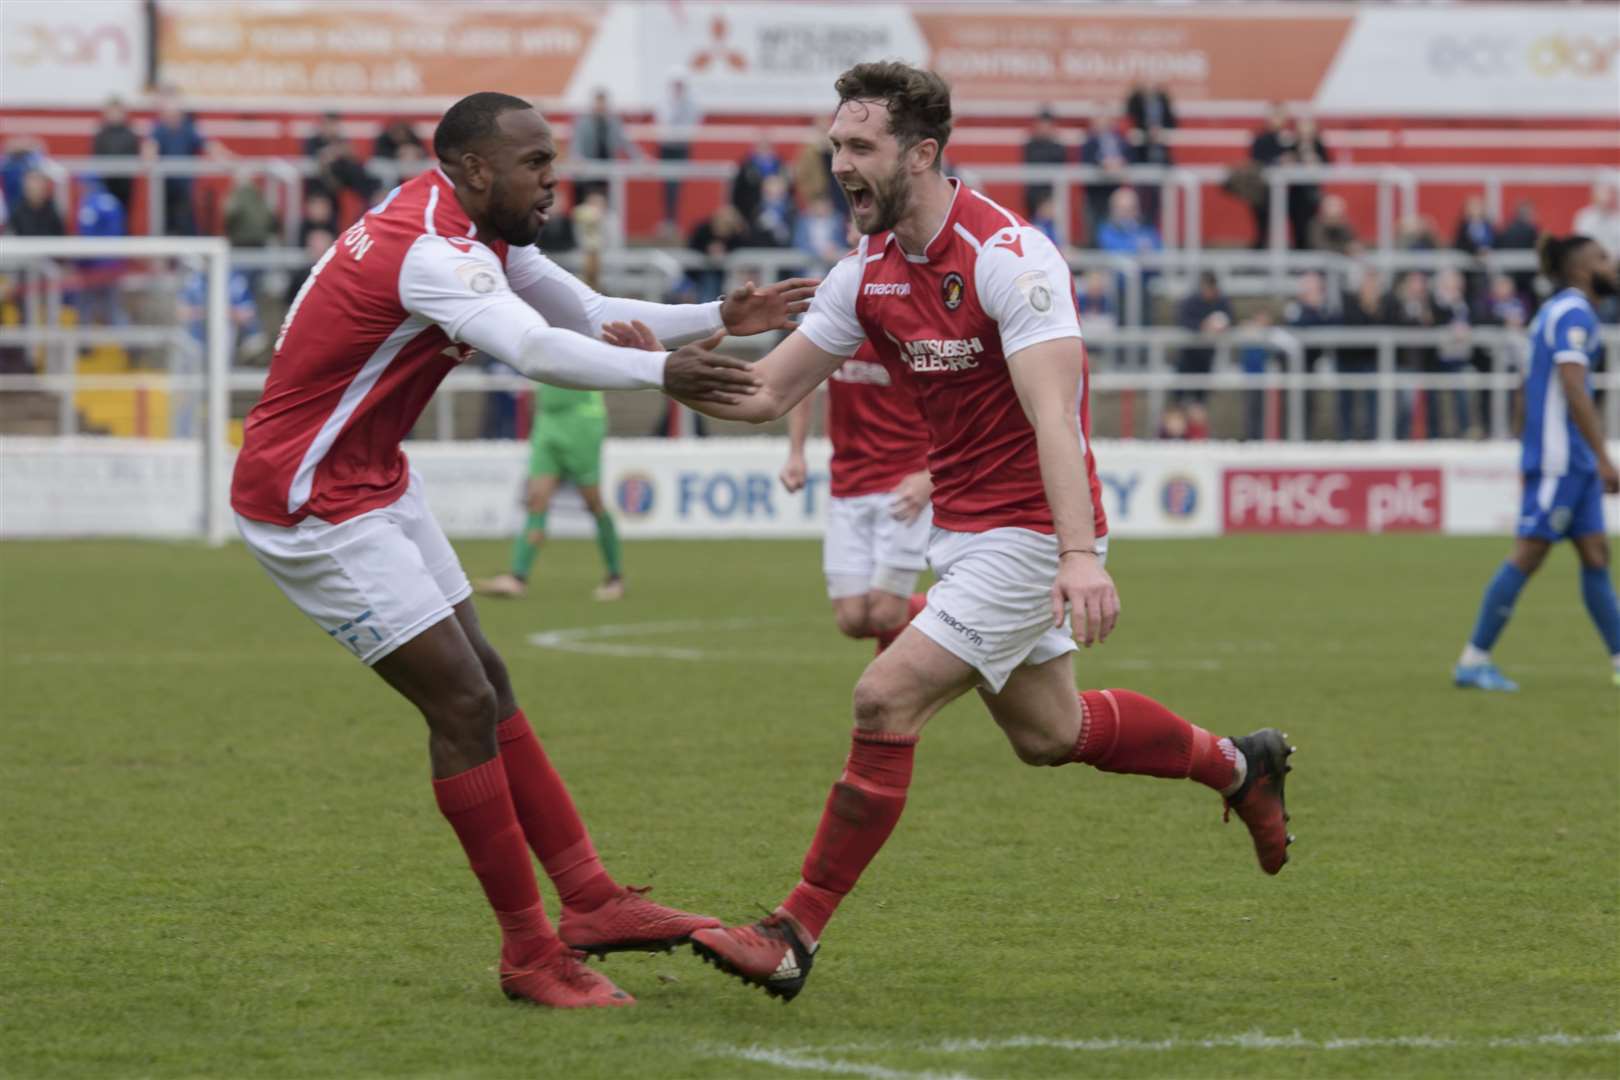 Dean Rance scored a dramatic late equaliser when Ebbsfleet hosted Macclesfield live on BT Sport Picture: Andy Payton